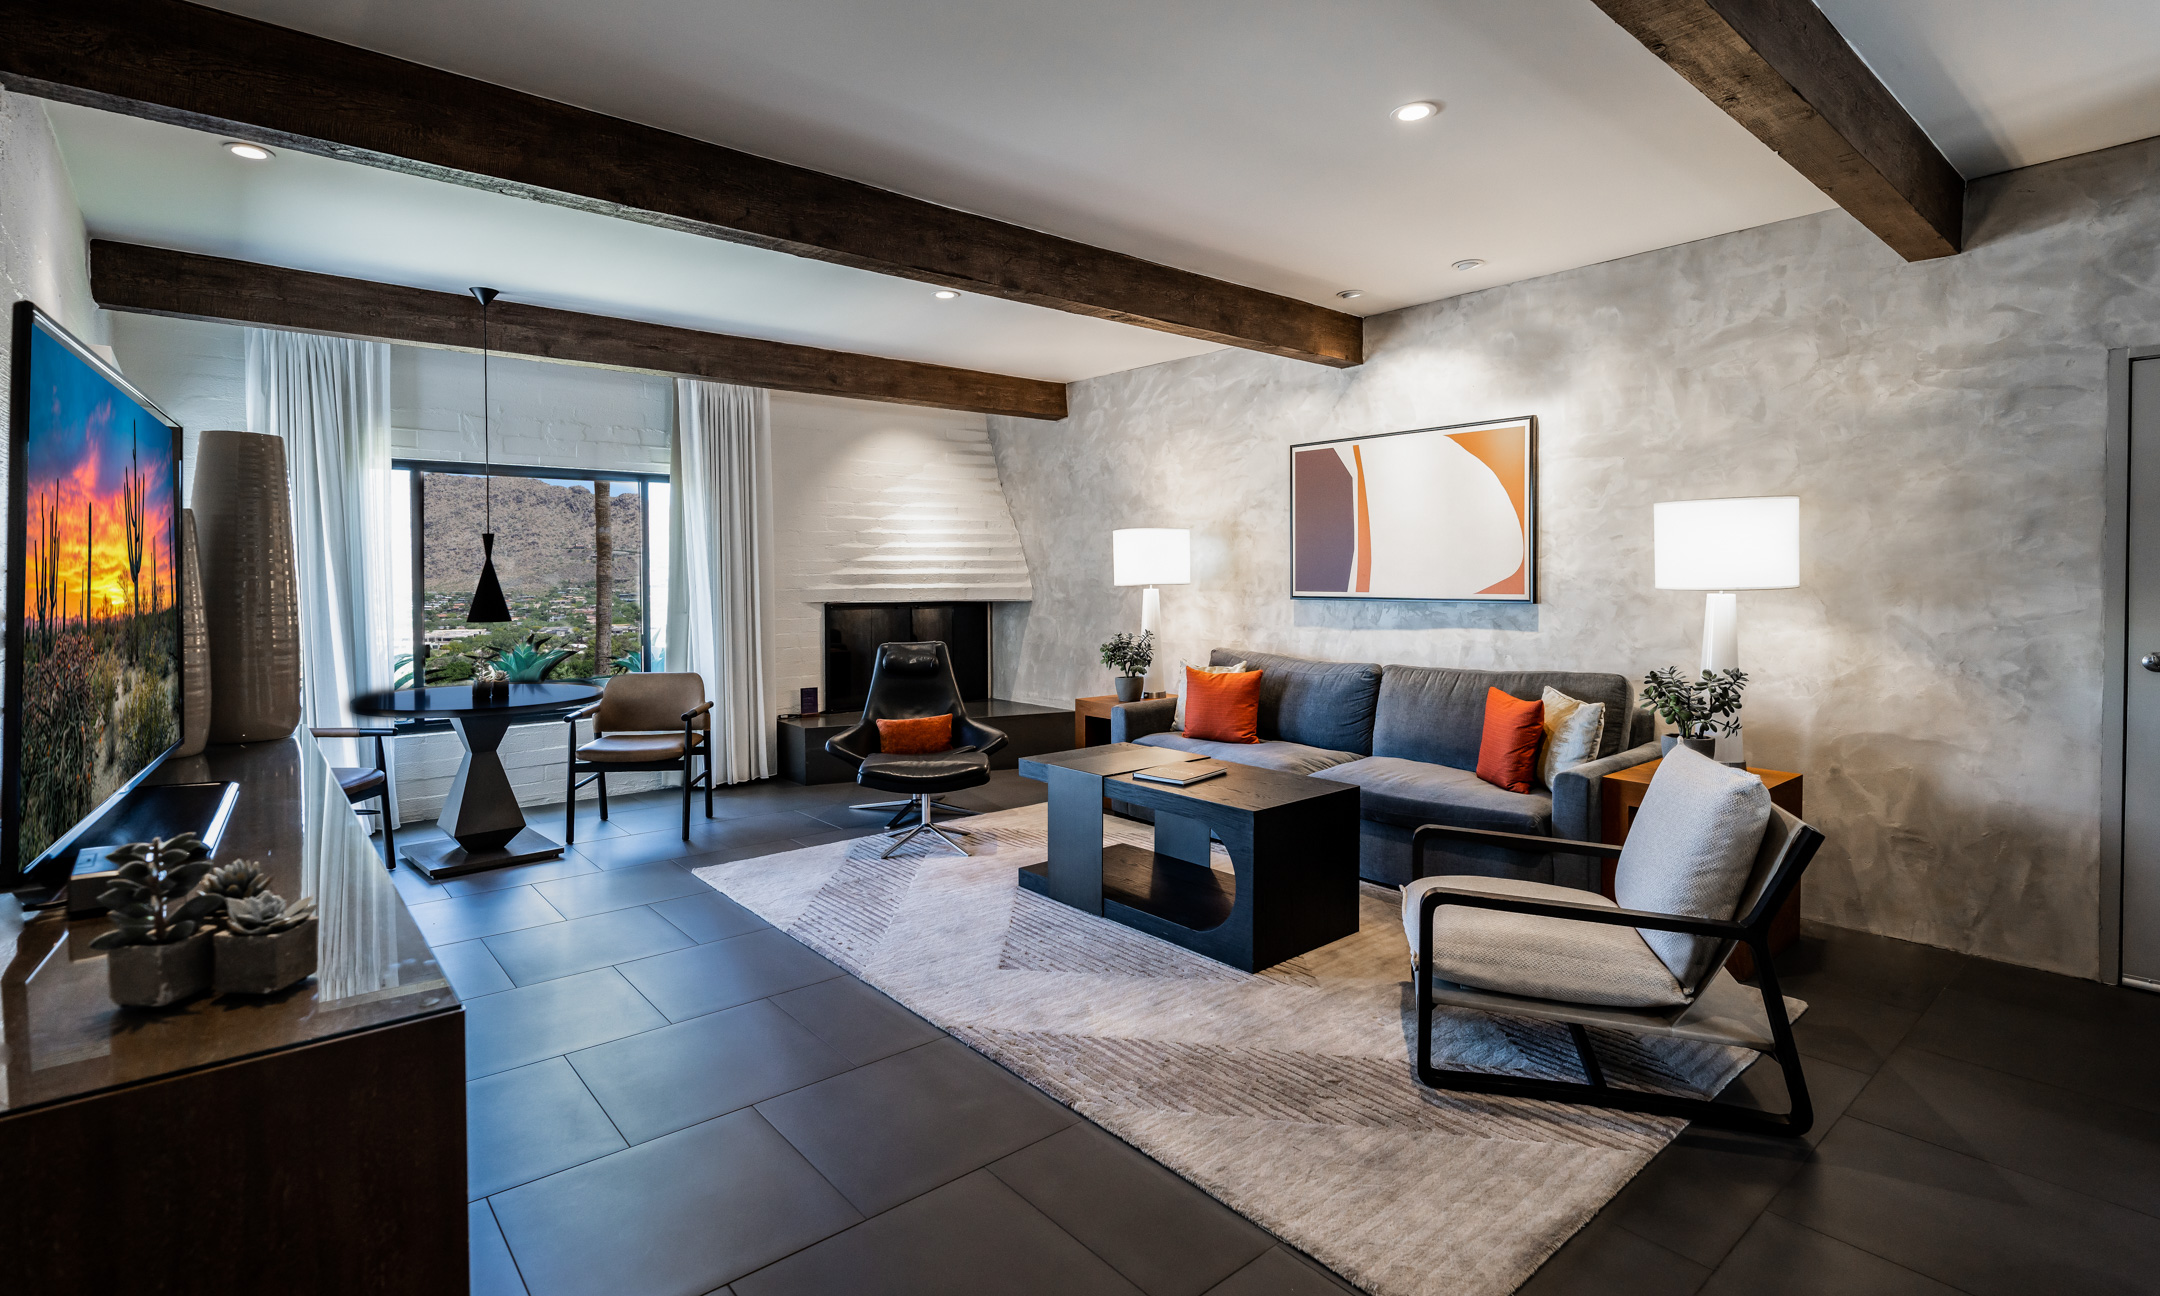 Accessible Mountain Suite living room with rug, accent wall, chair and couch, coffee table, fireplace and table and chairs overlooking view.